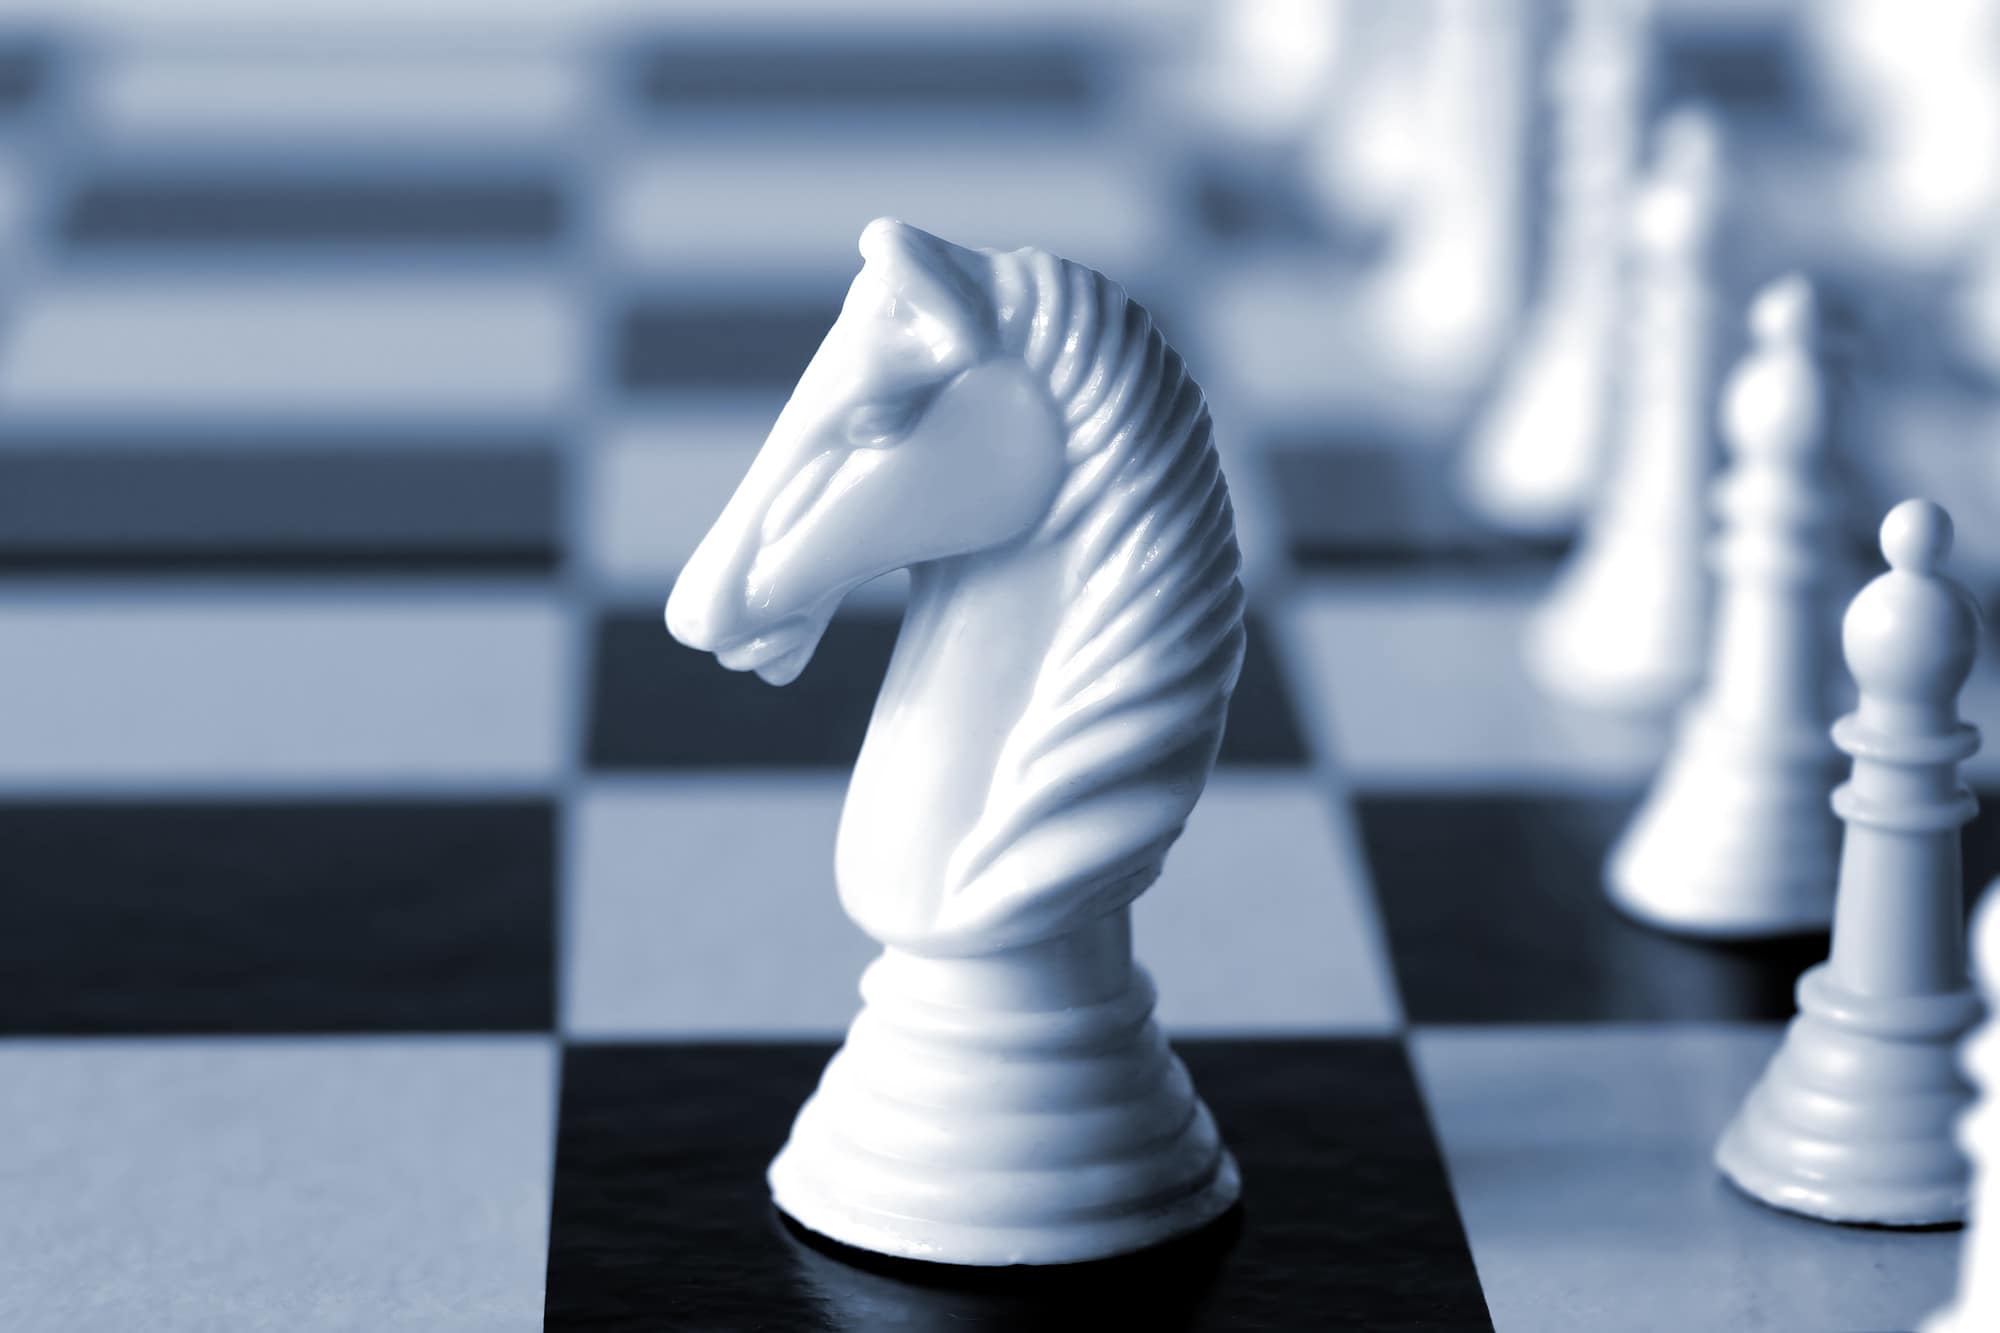 White knight on a chessboard with other pieces of out of focus